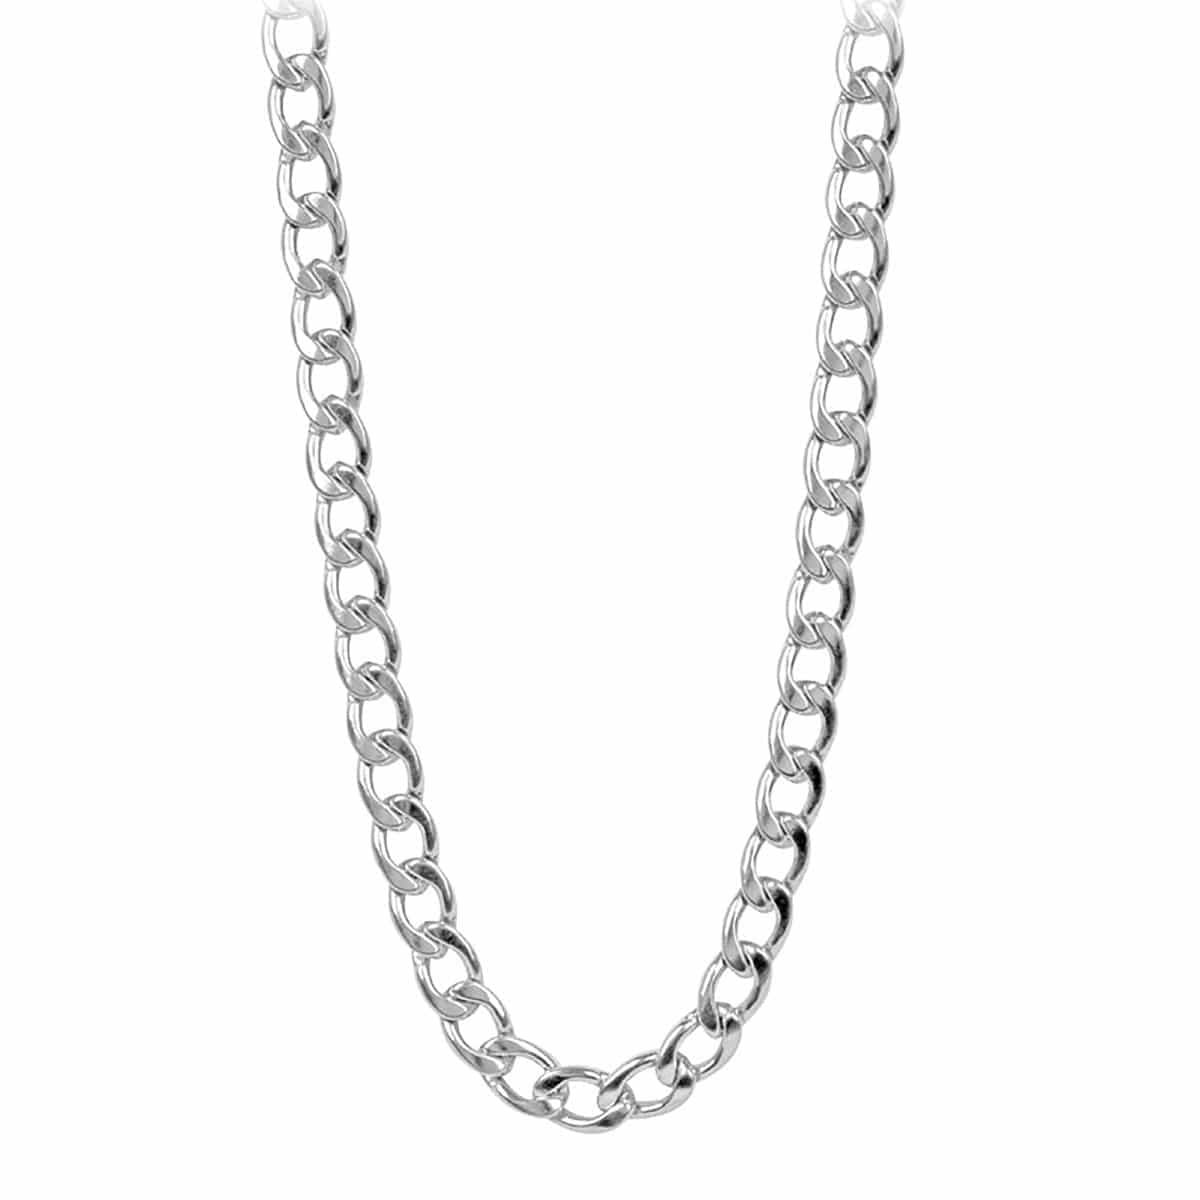 INOX JEWELRY Chains Silver Tone Stainless Steel Large 10mm Round Curb Chain